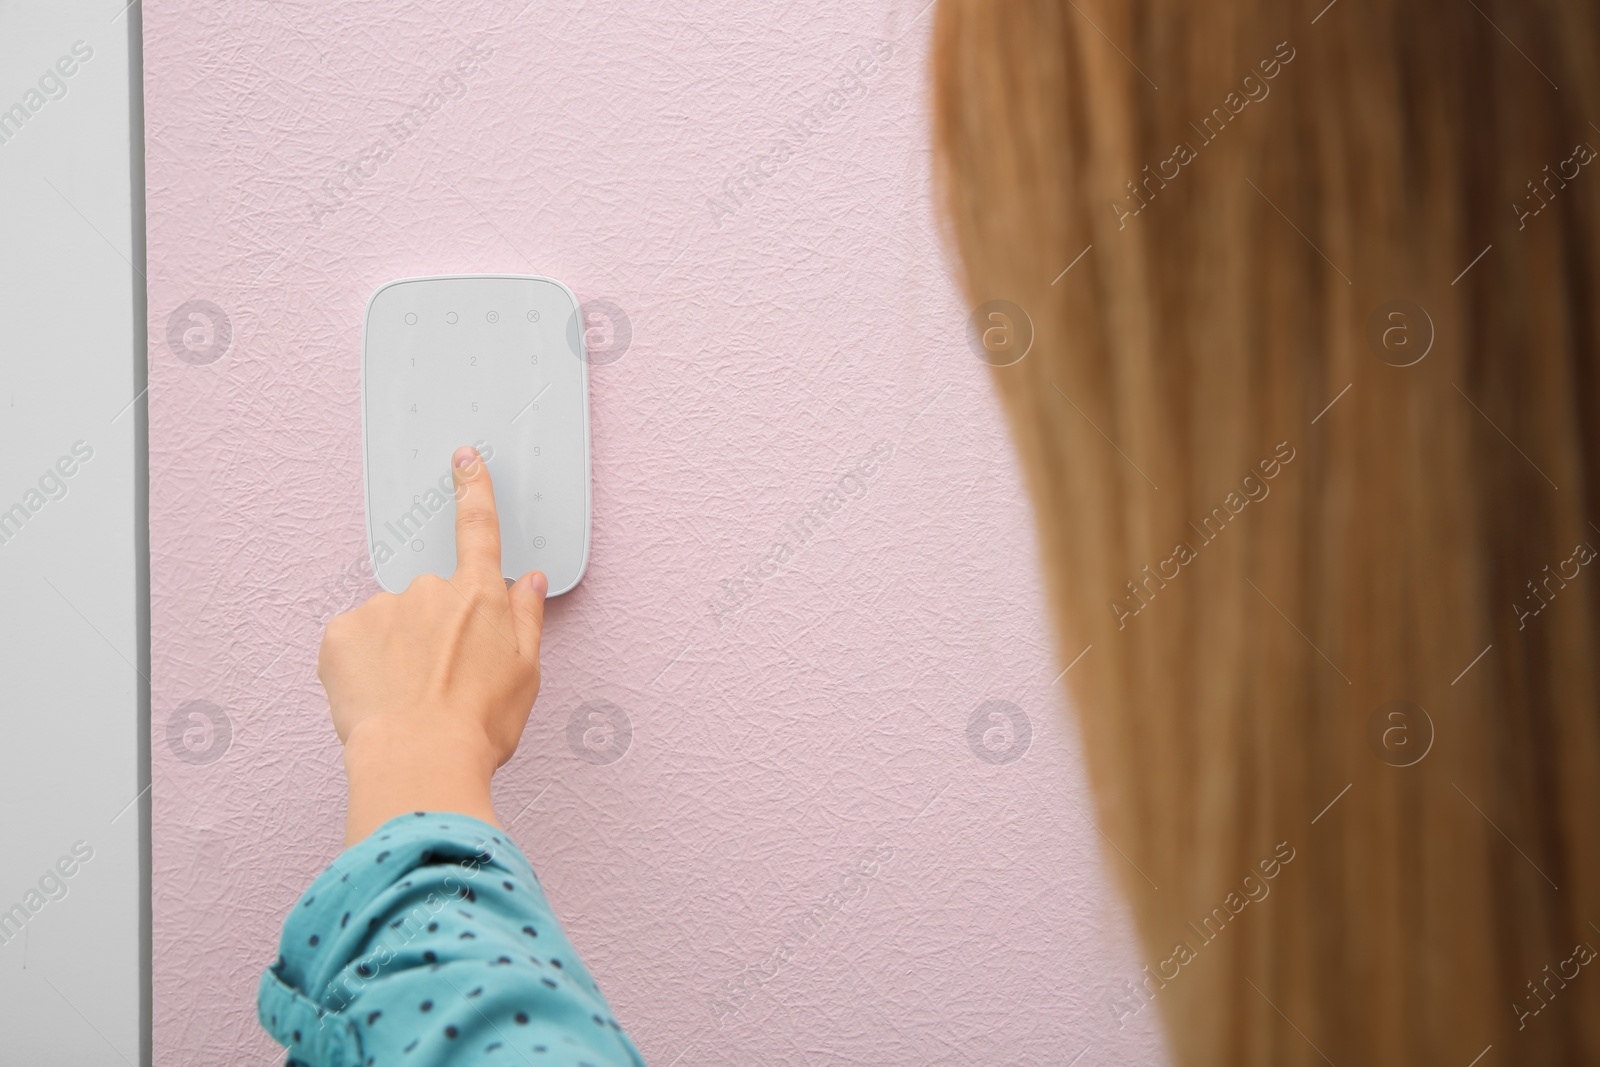 Photo of Young woman entering code on alarm system keypad indoors